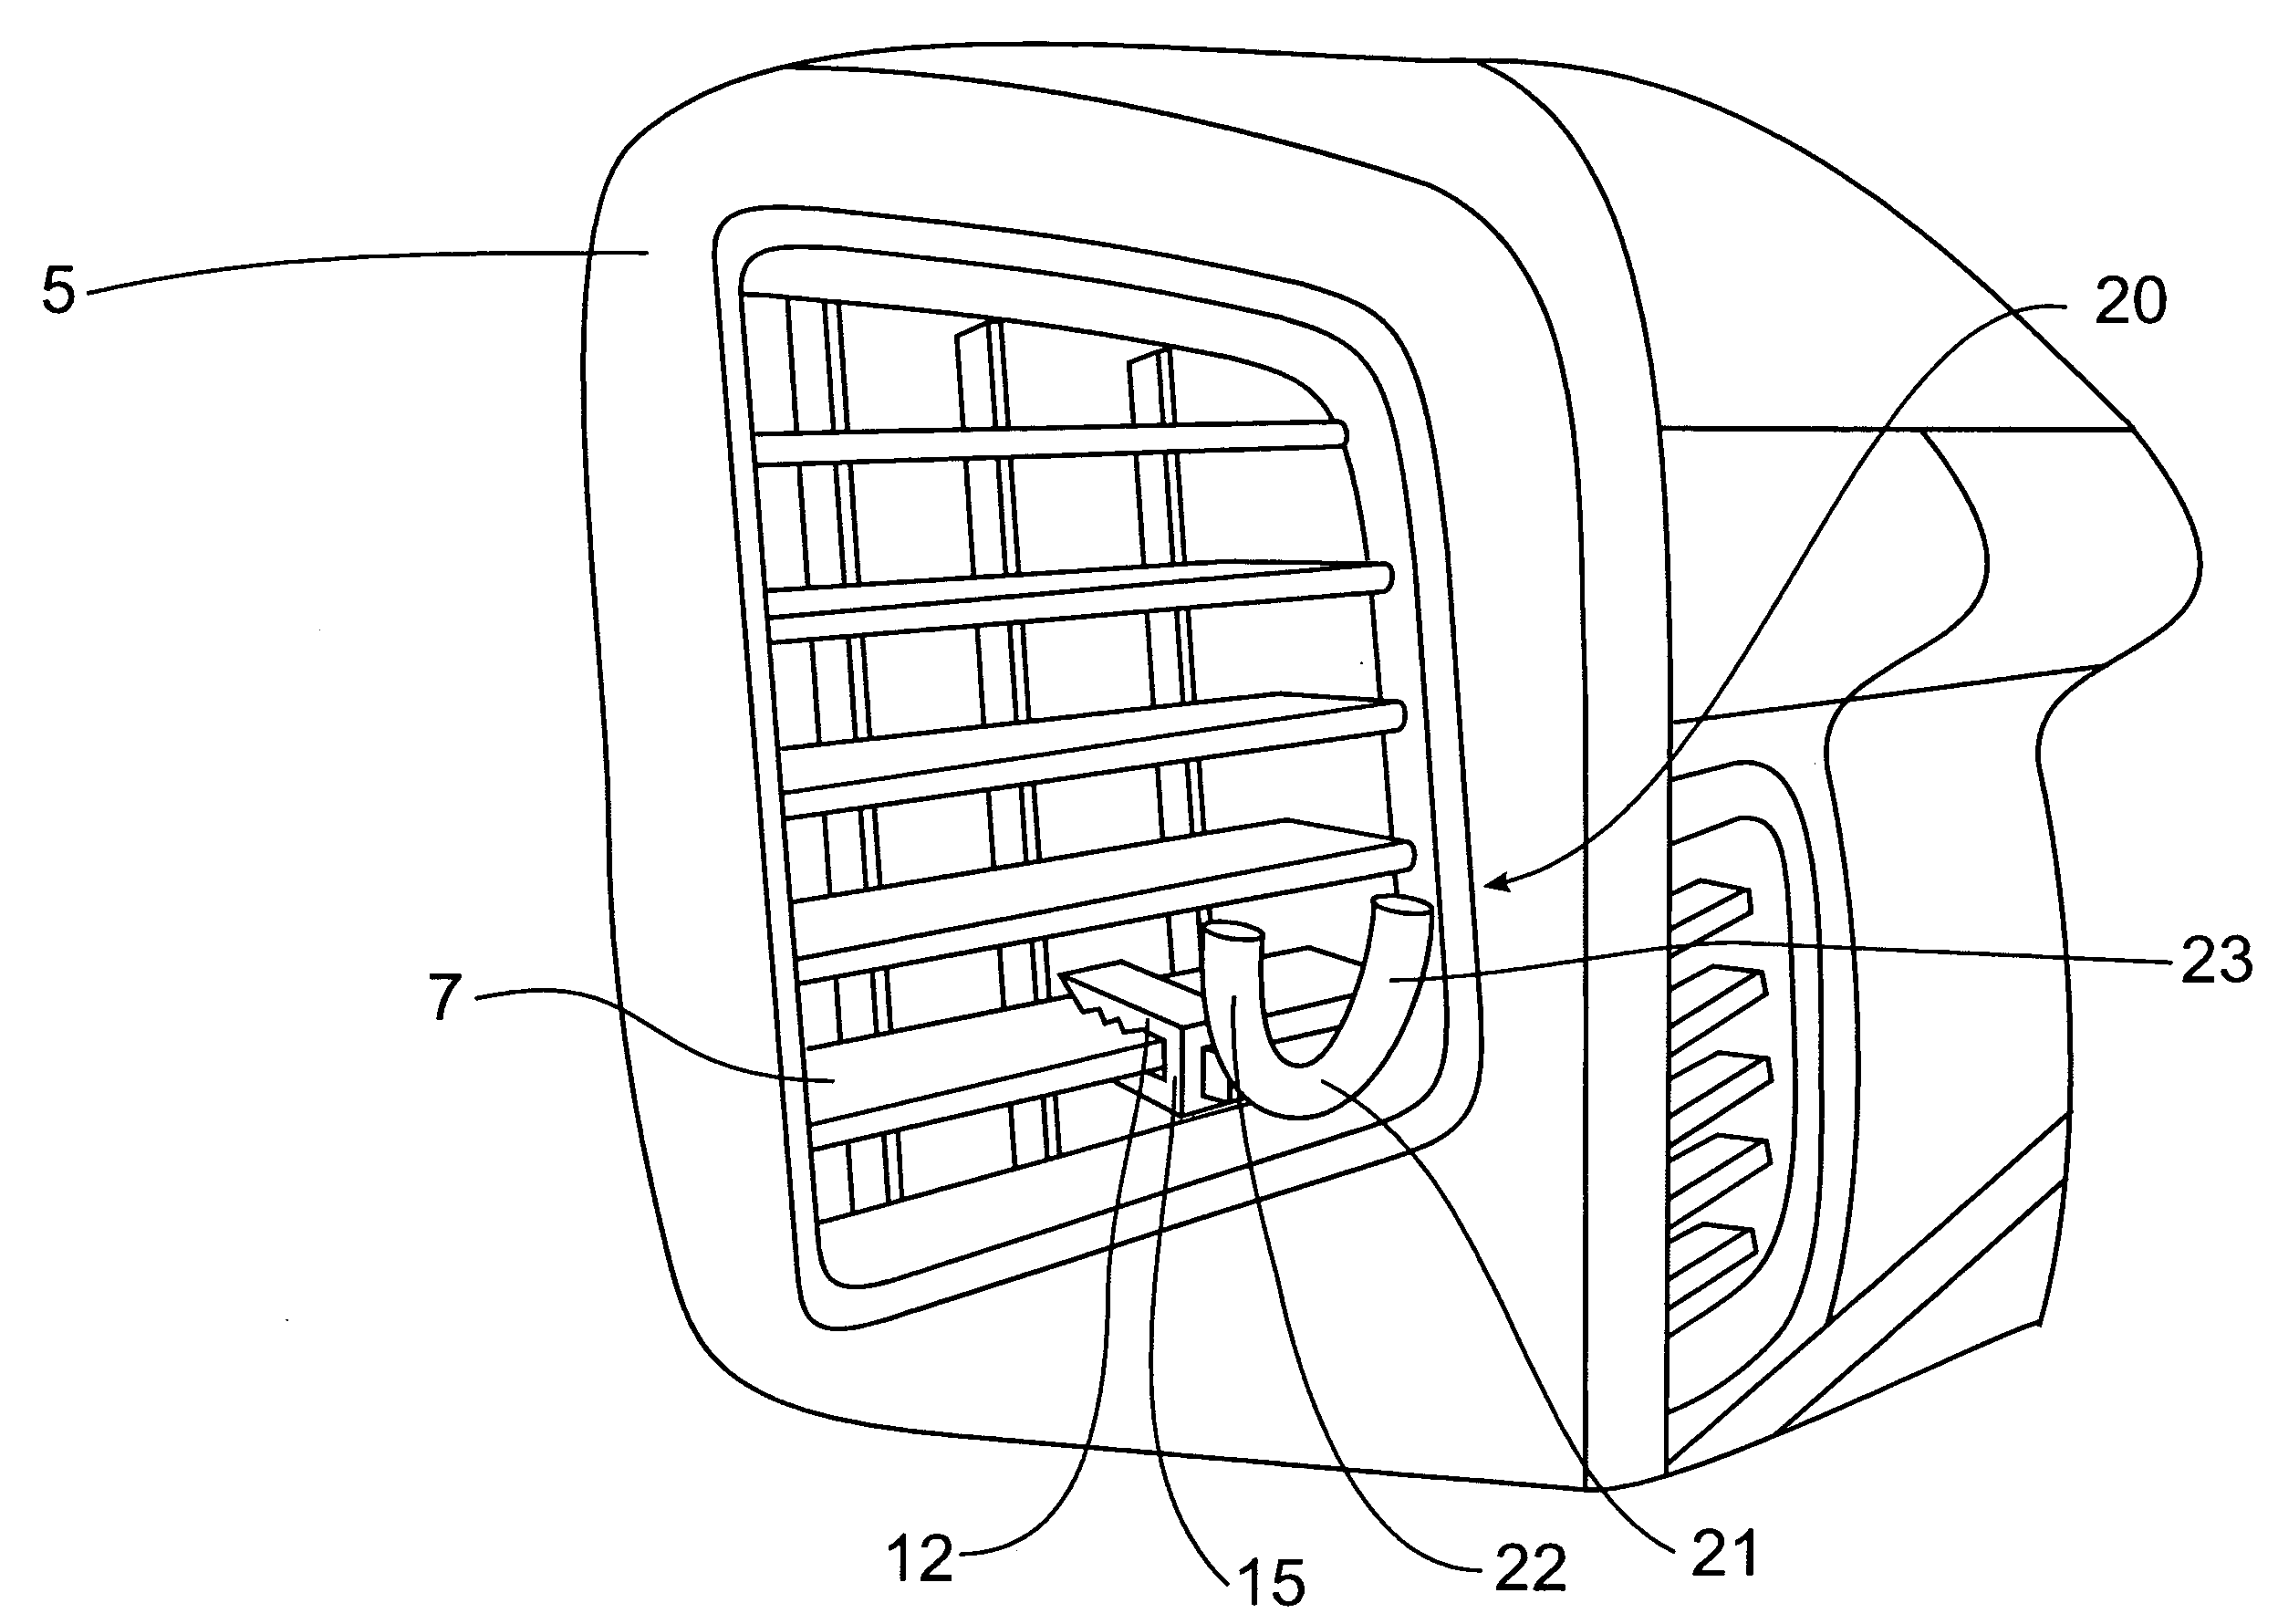 Device for Supporting Telephone Headpieces in Automobiles